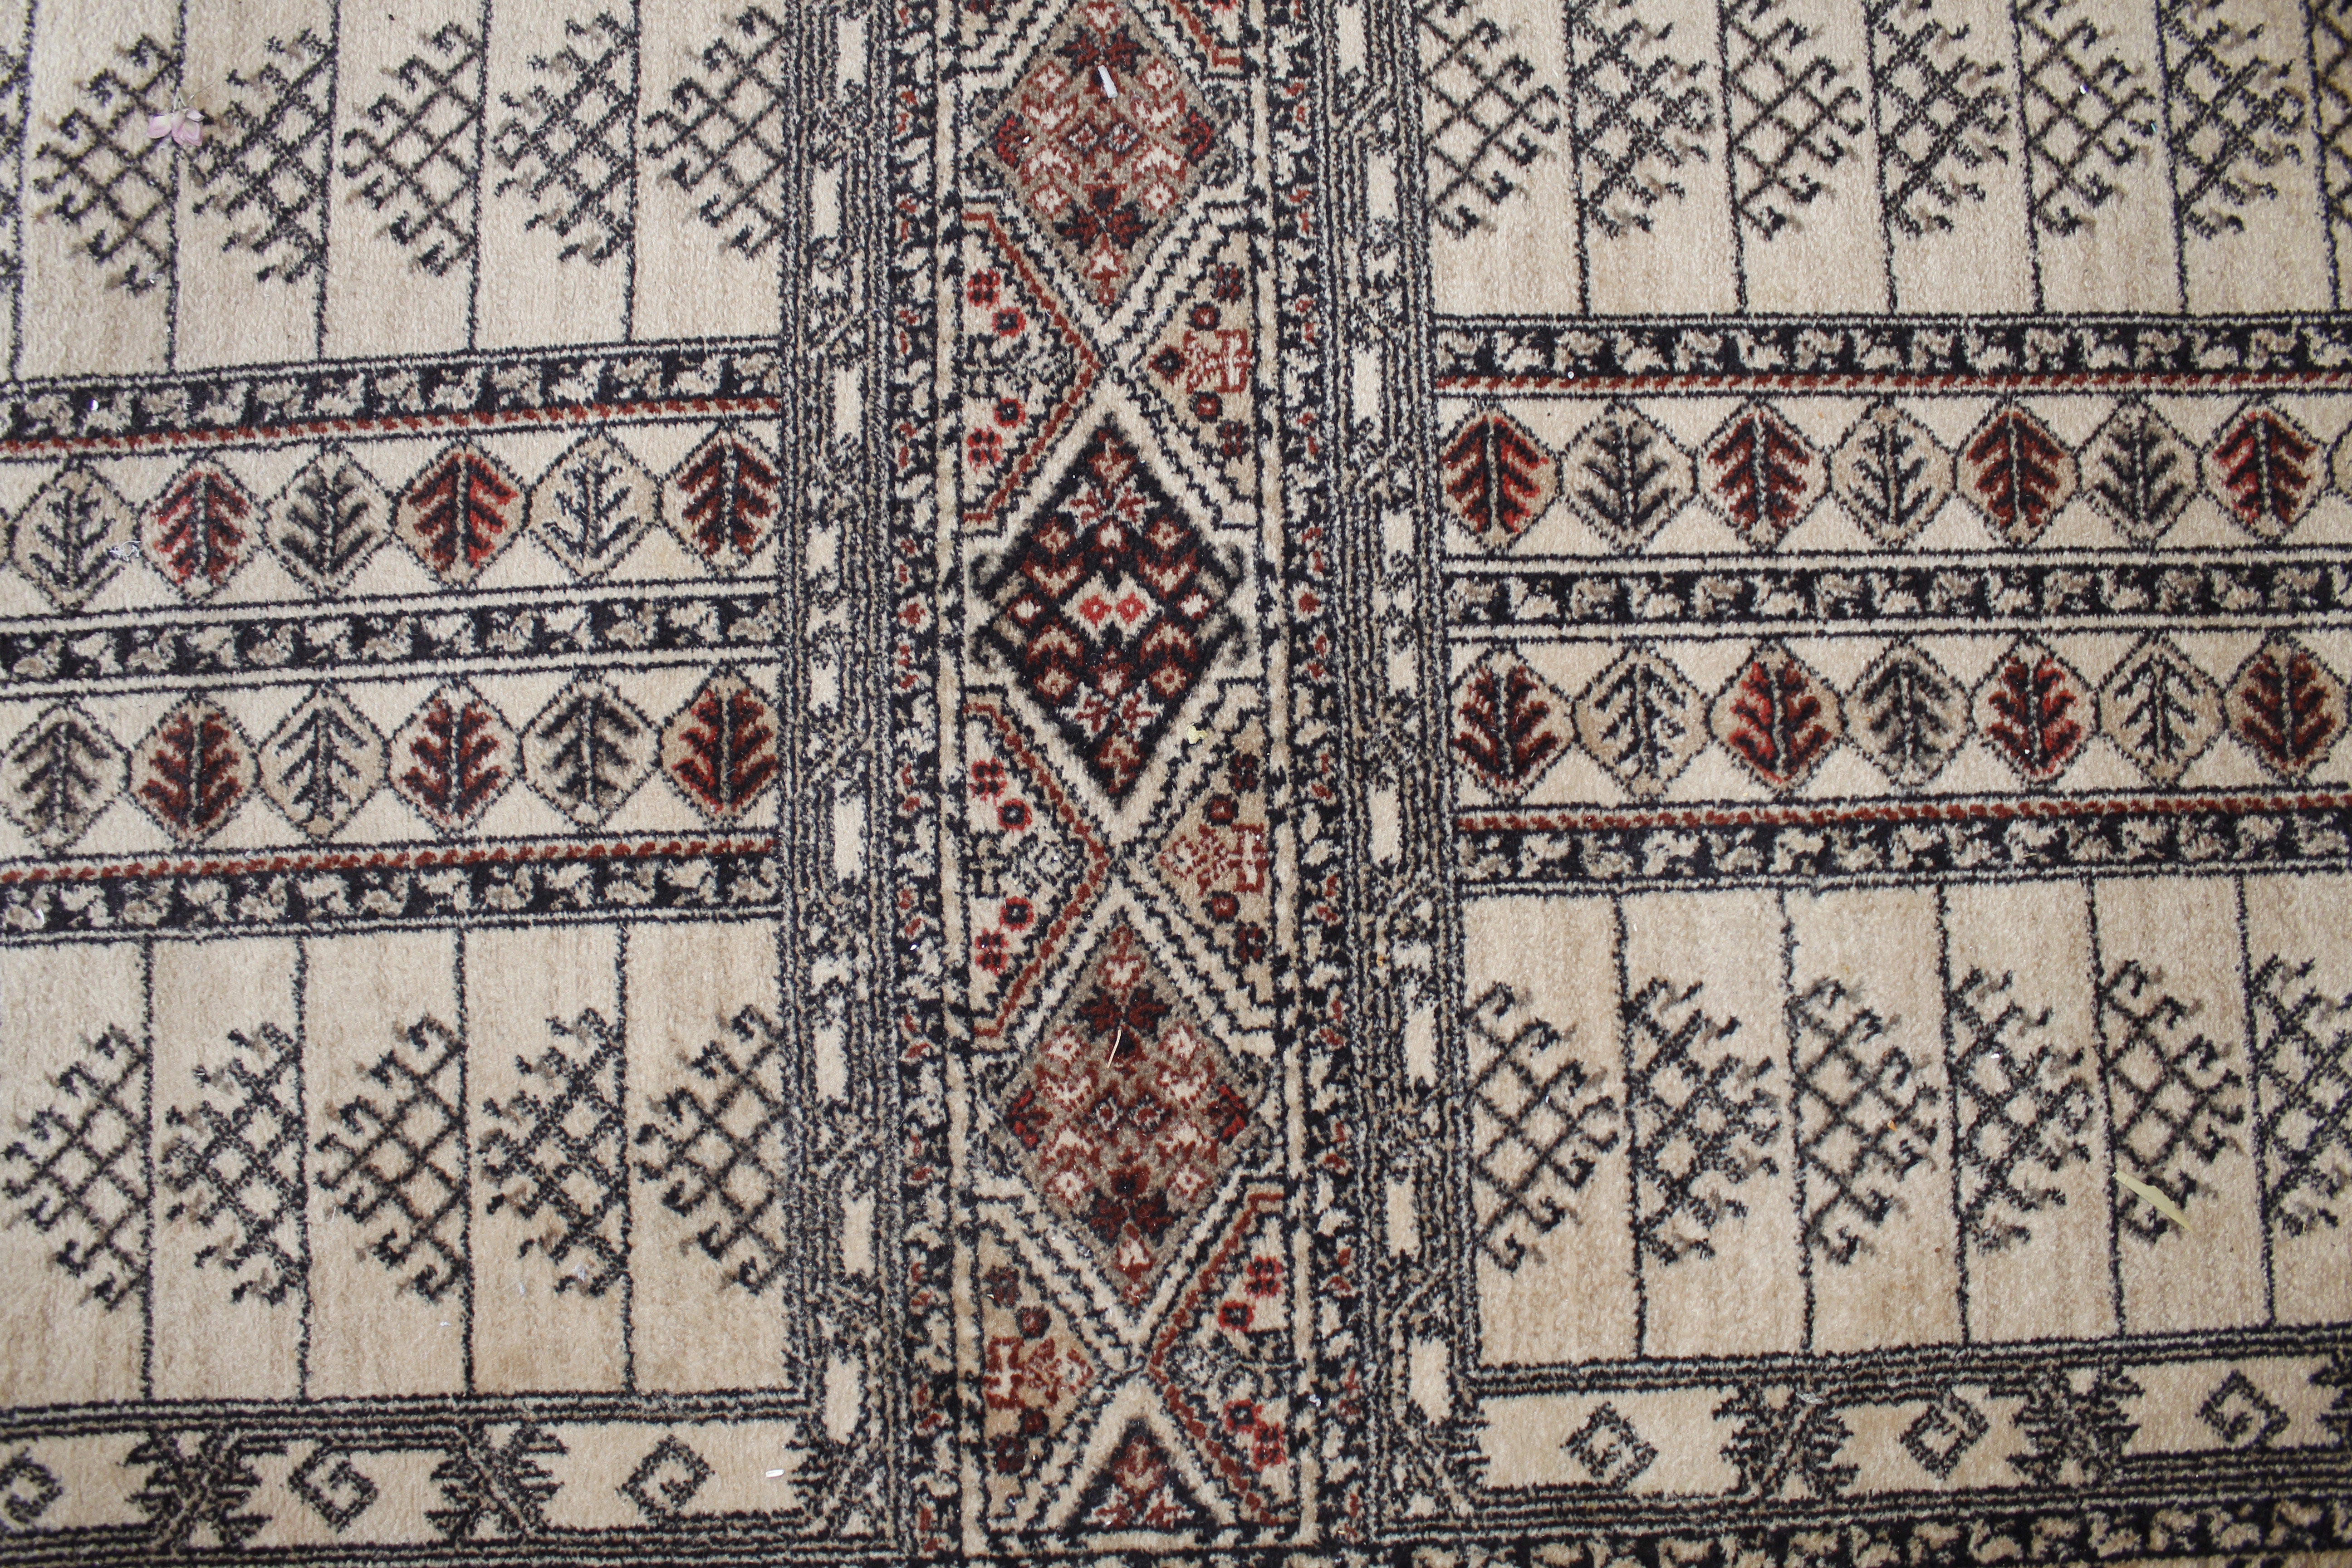 An approx. 7'6" x 5'7" beige patterned rug - Image 2 of 3